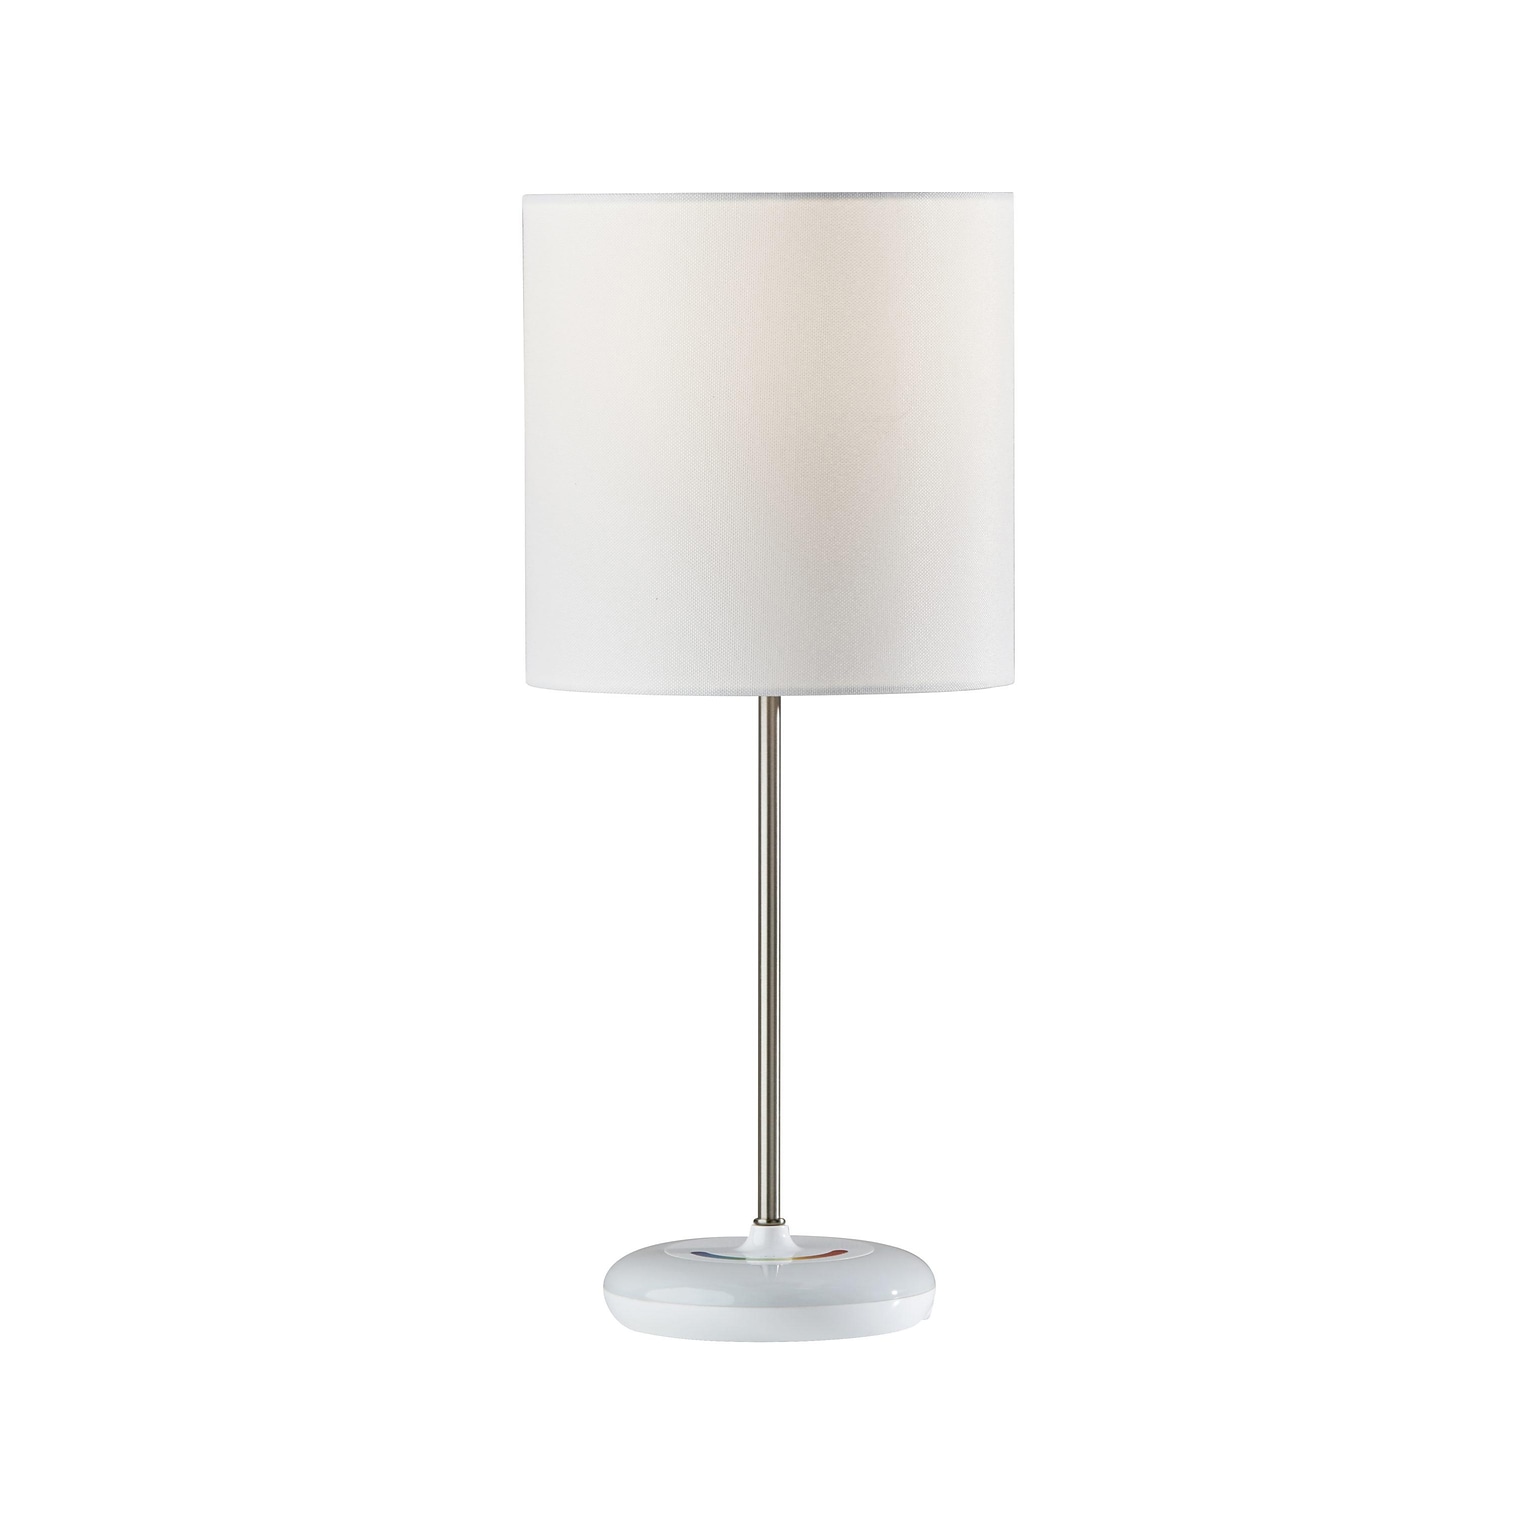 Simplee Adesso Mia Color Changing Interchangeable Table Lamp, White/Brushed Steel (SL4905-02)